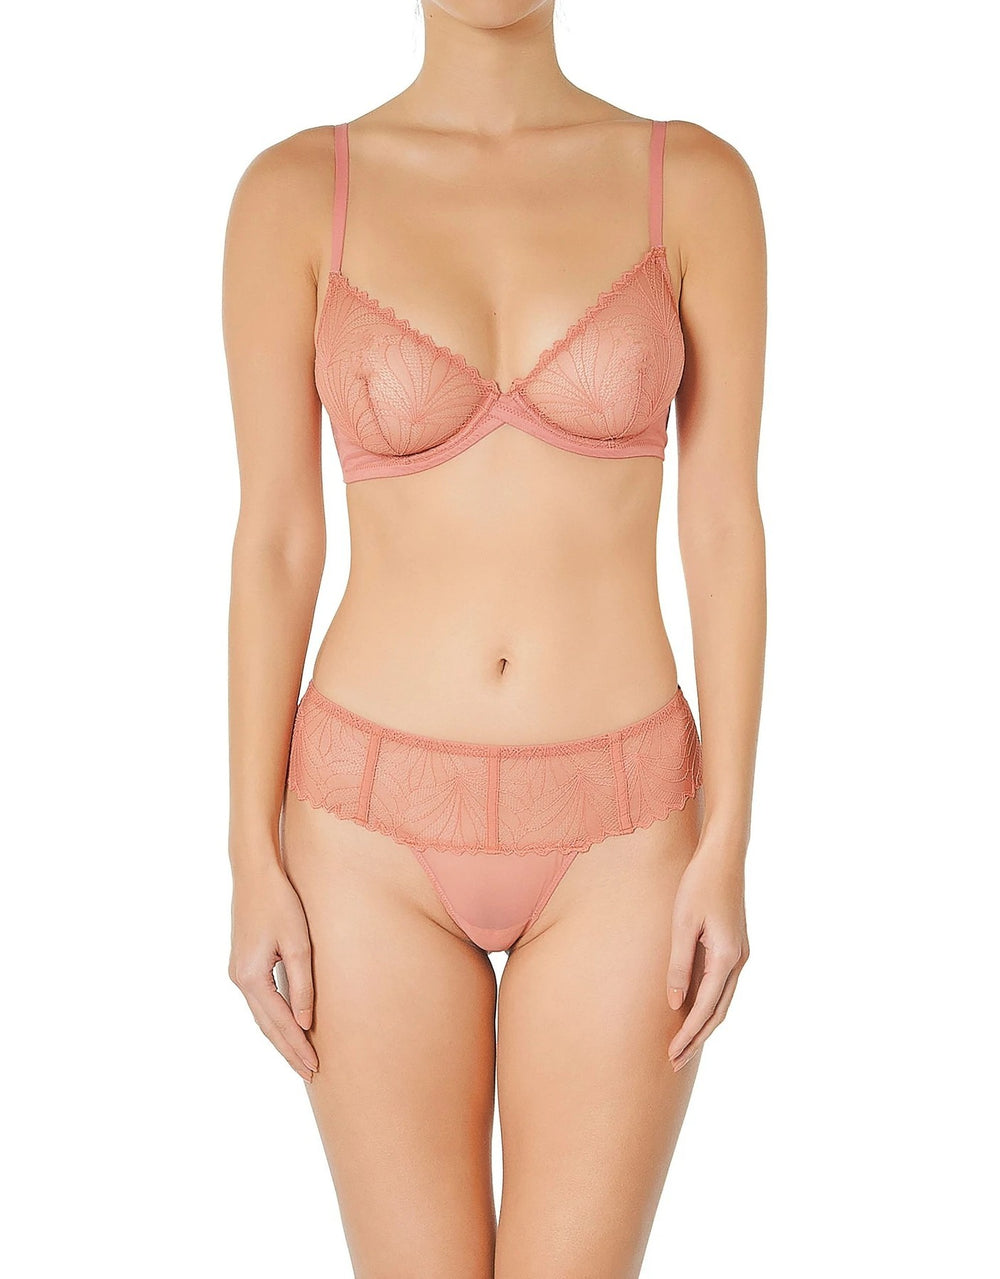 Huit Lenna Lace Thong in Sienna